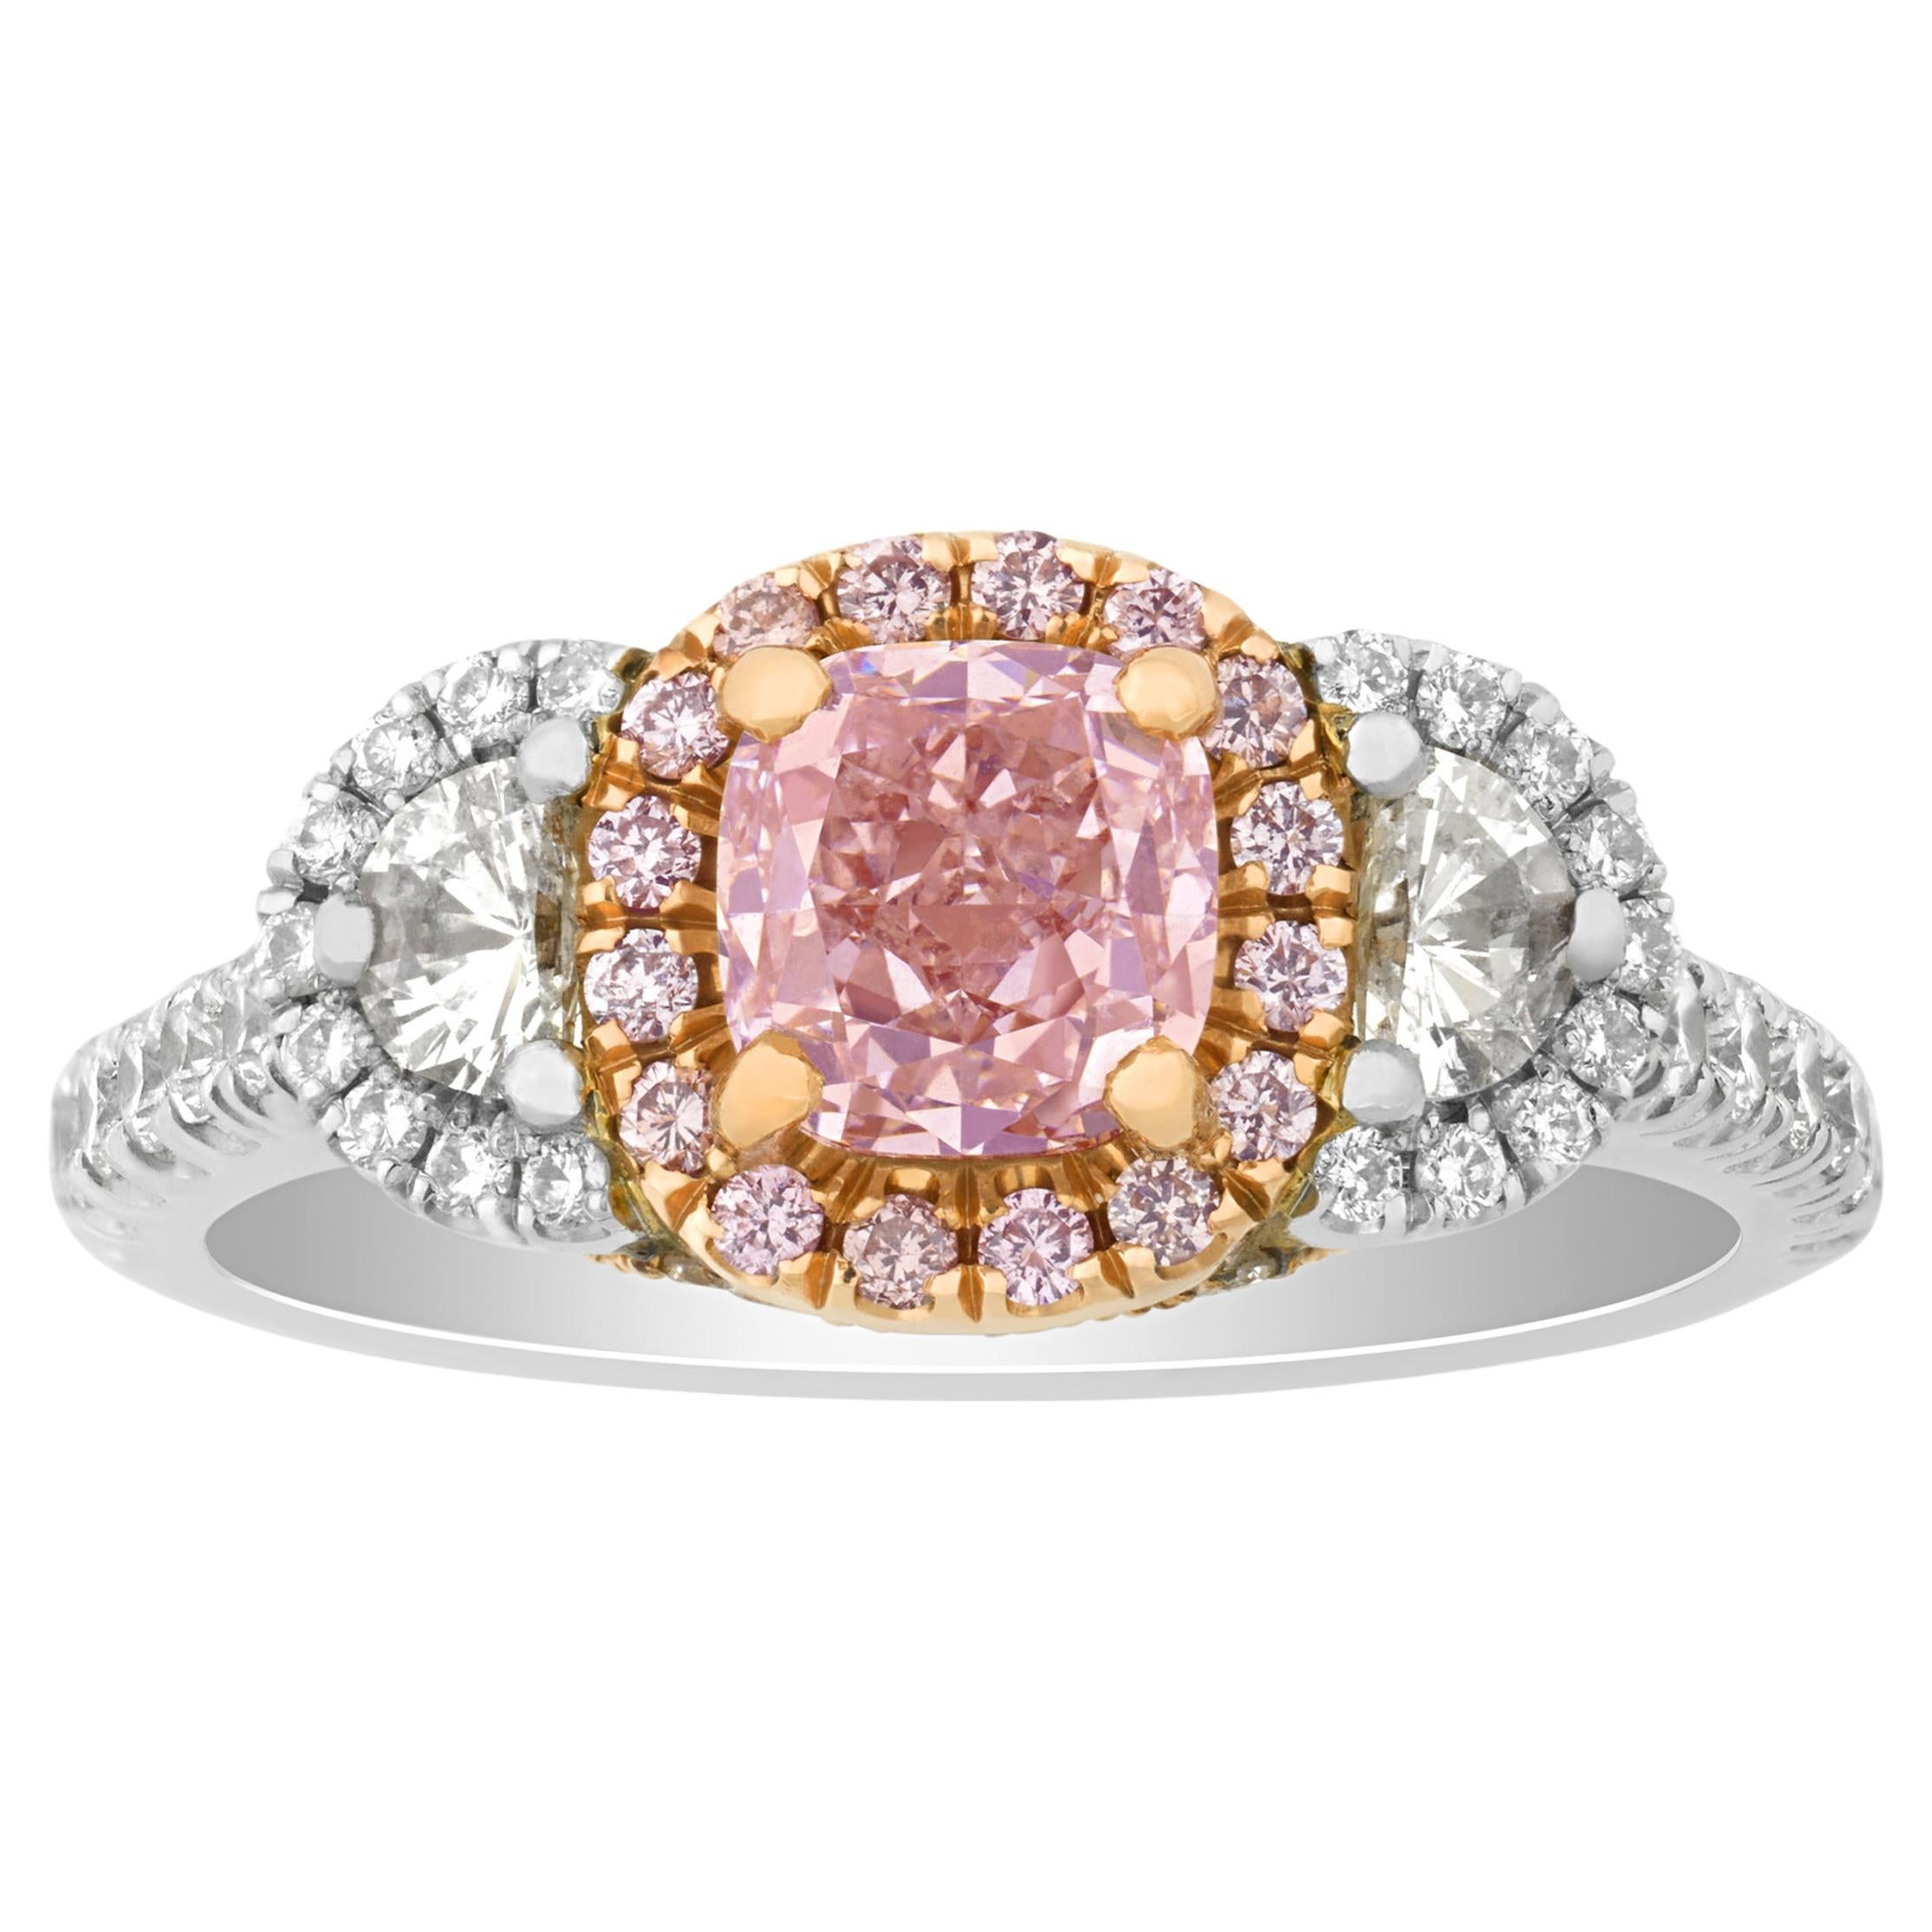 Fancy Pink Diamond Ring, 1.02 Carats For Sale